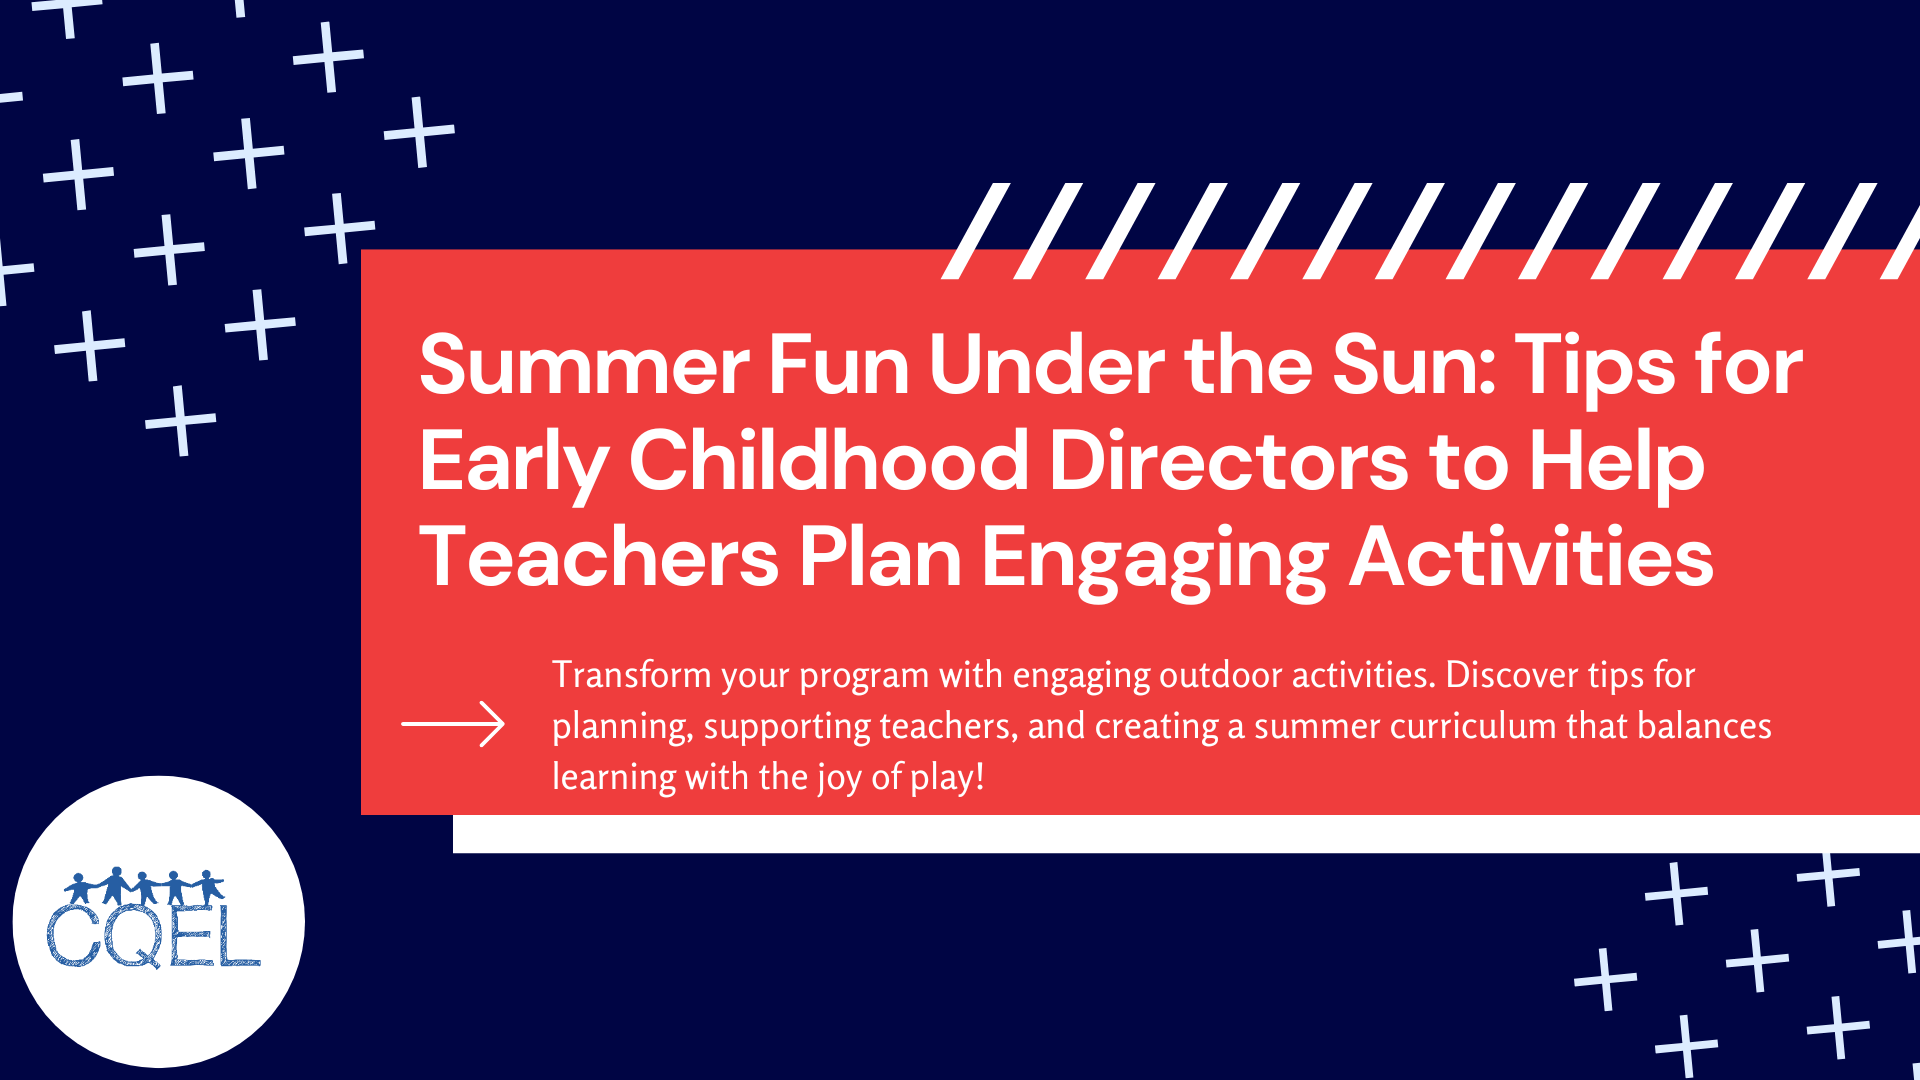 Summer Fun Under the Sun: Tips for Early Childhood Directors to Help Teachers Plan Engaging Activities